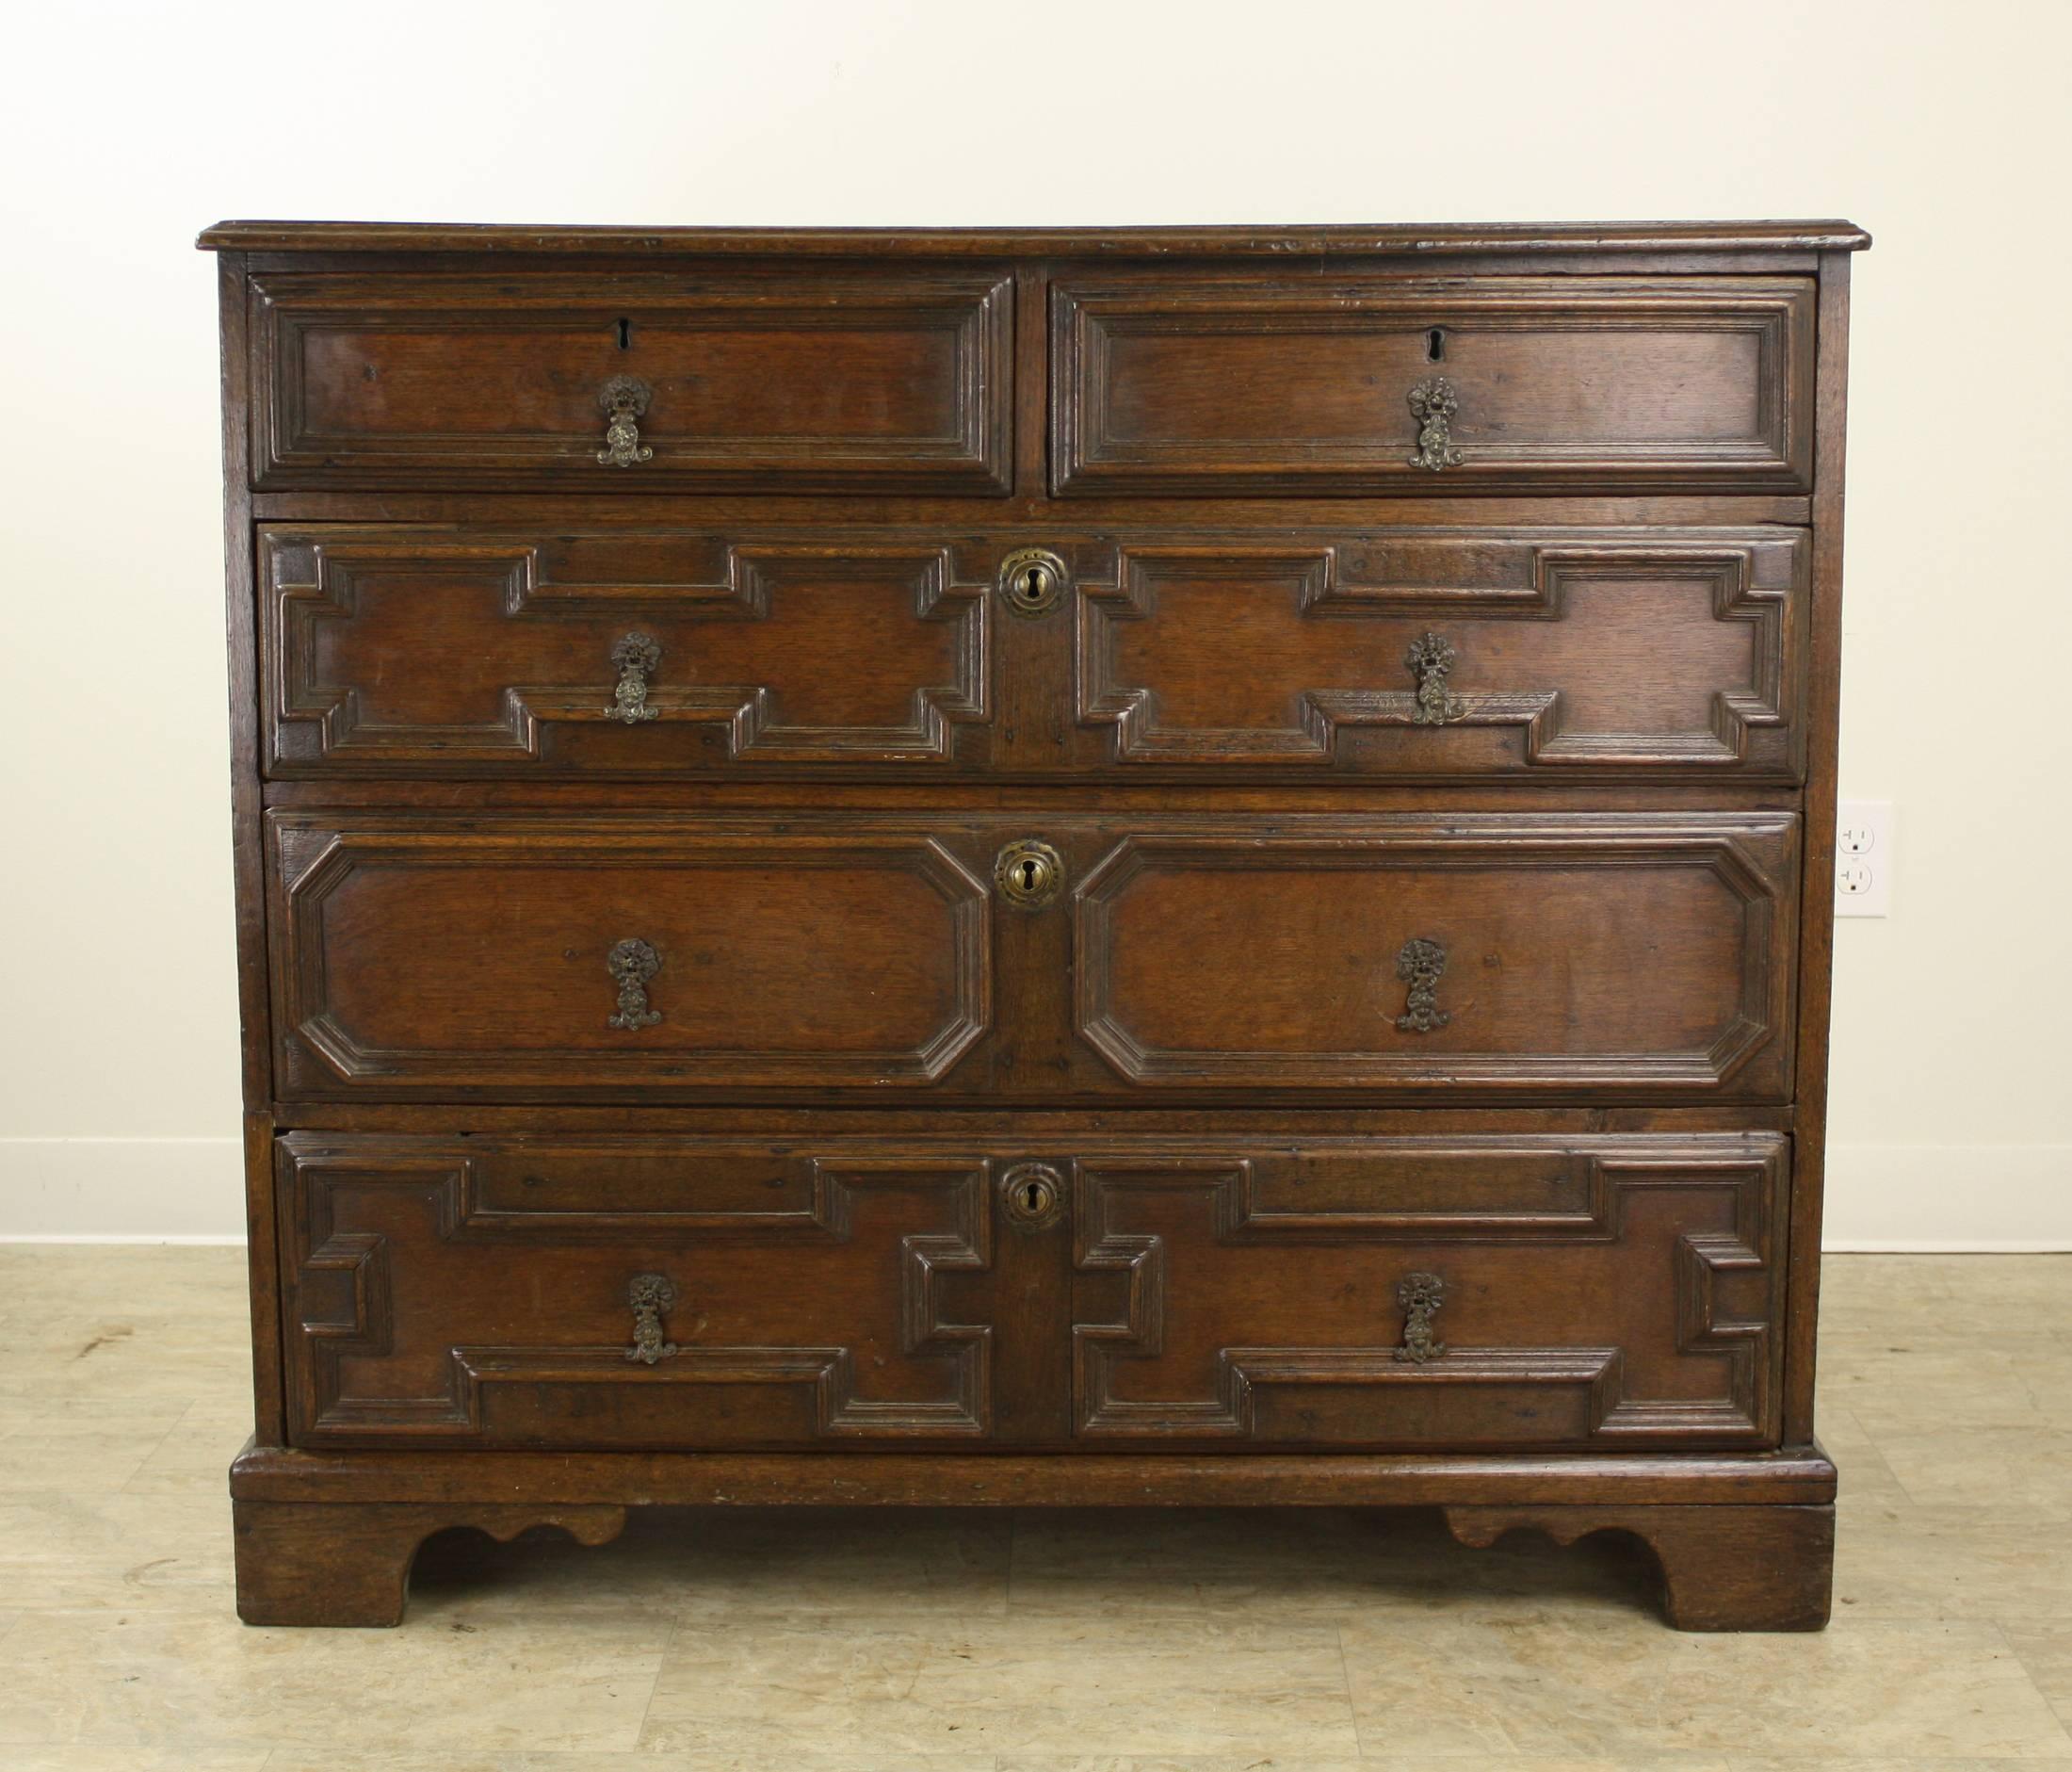 Dating from circa 1740, this large and stunning Classic Jacobean chest of drawer's is dramatic and unique. Two top drawer's atop three roomy bottom drawer's. The panels all around the body of the chest are very impressive. Diagonal patterns on the